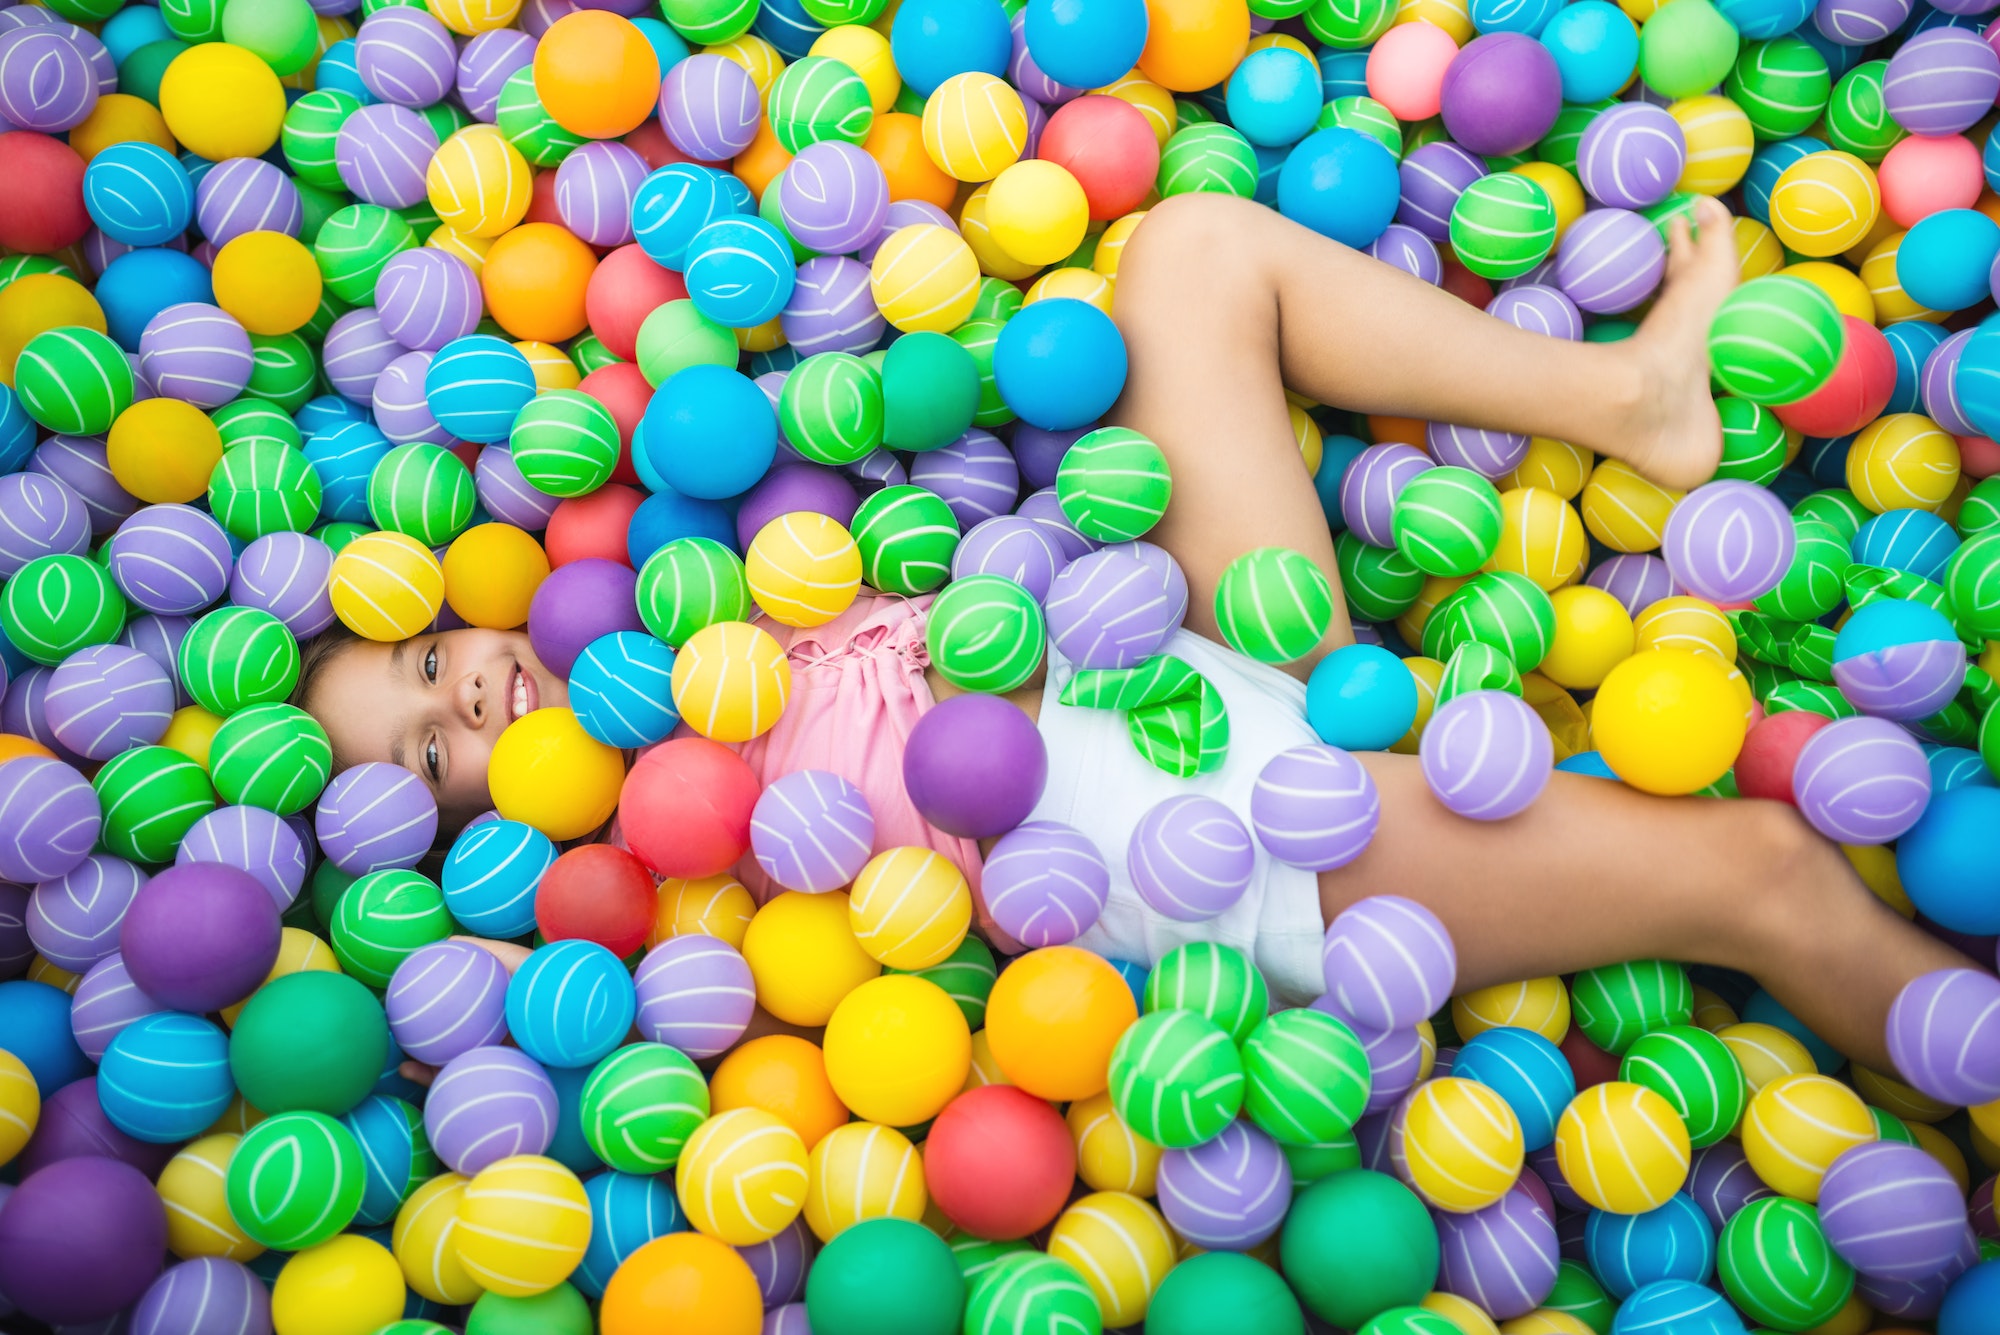 Child lying in pool with plastic balls